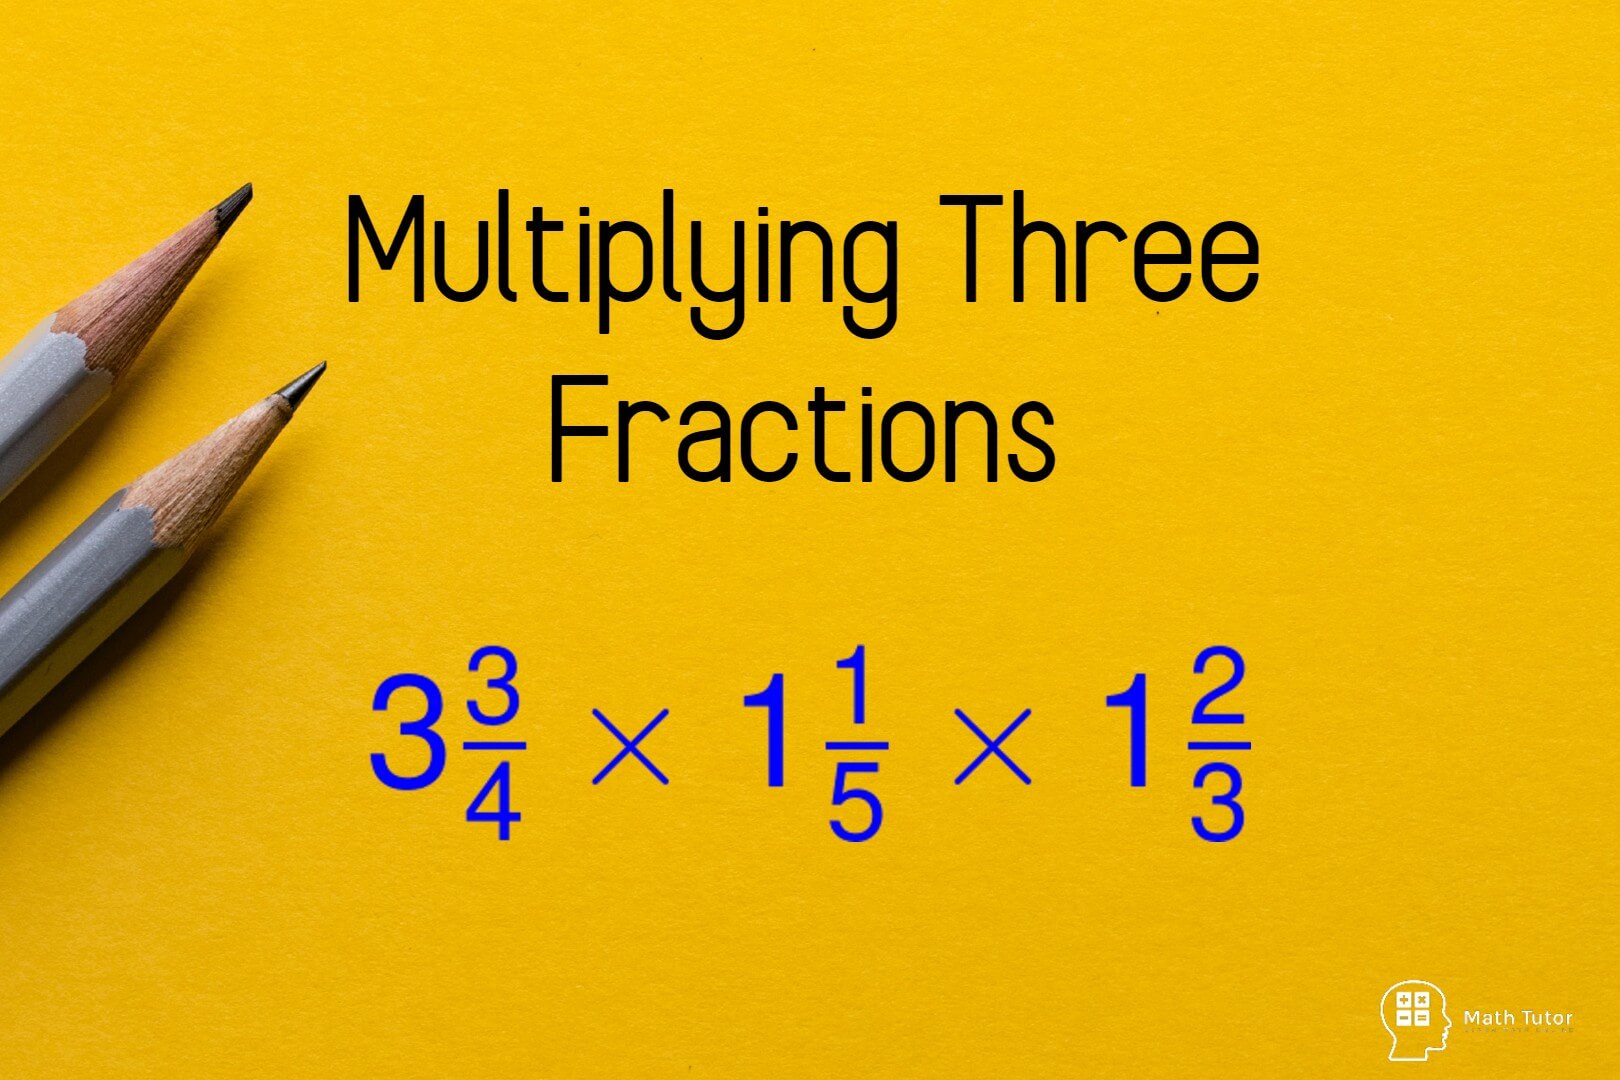 multiplying-three-fractions-how-to-multiply-fractions-math-tutor